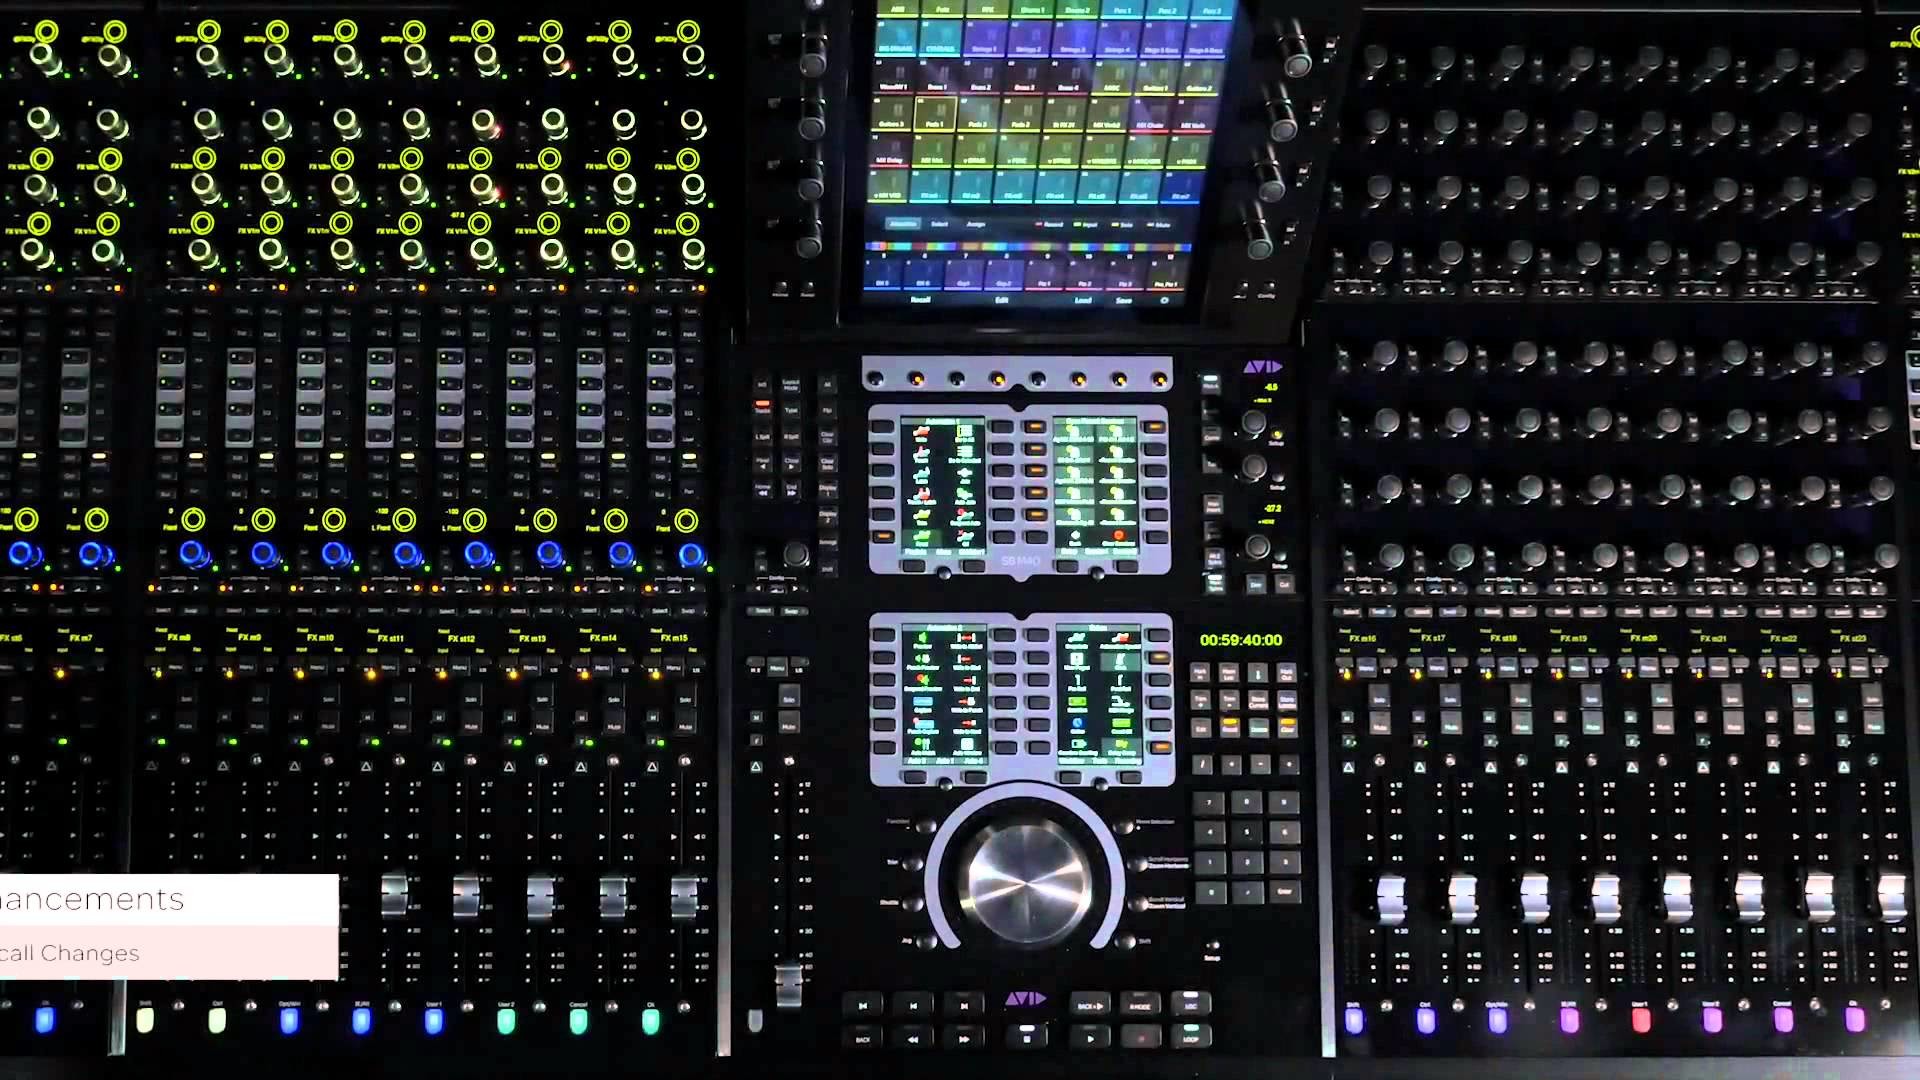 1920x1080 Get Started Fast with Avid Pro Tools | S6 - v2.0 Layout Enhancements